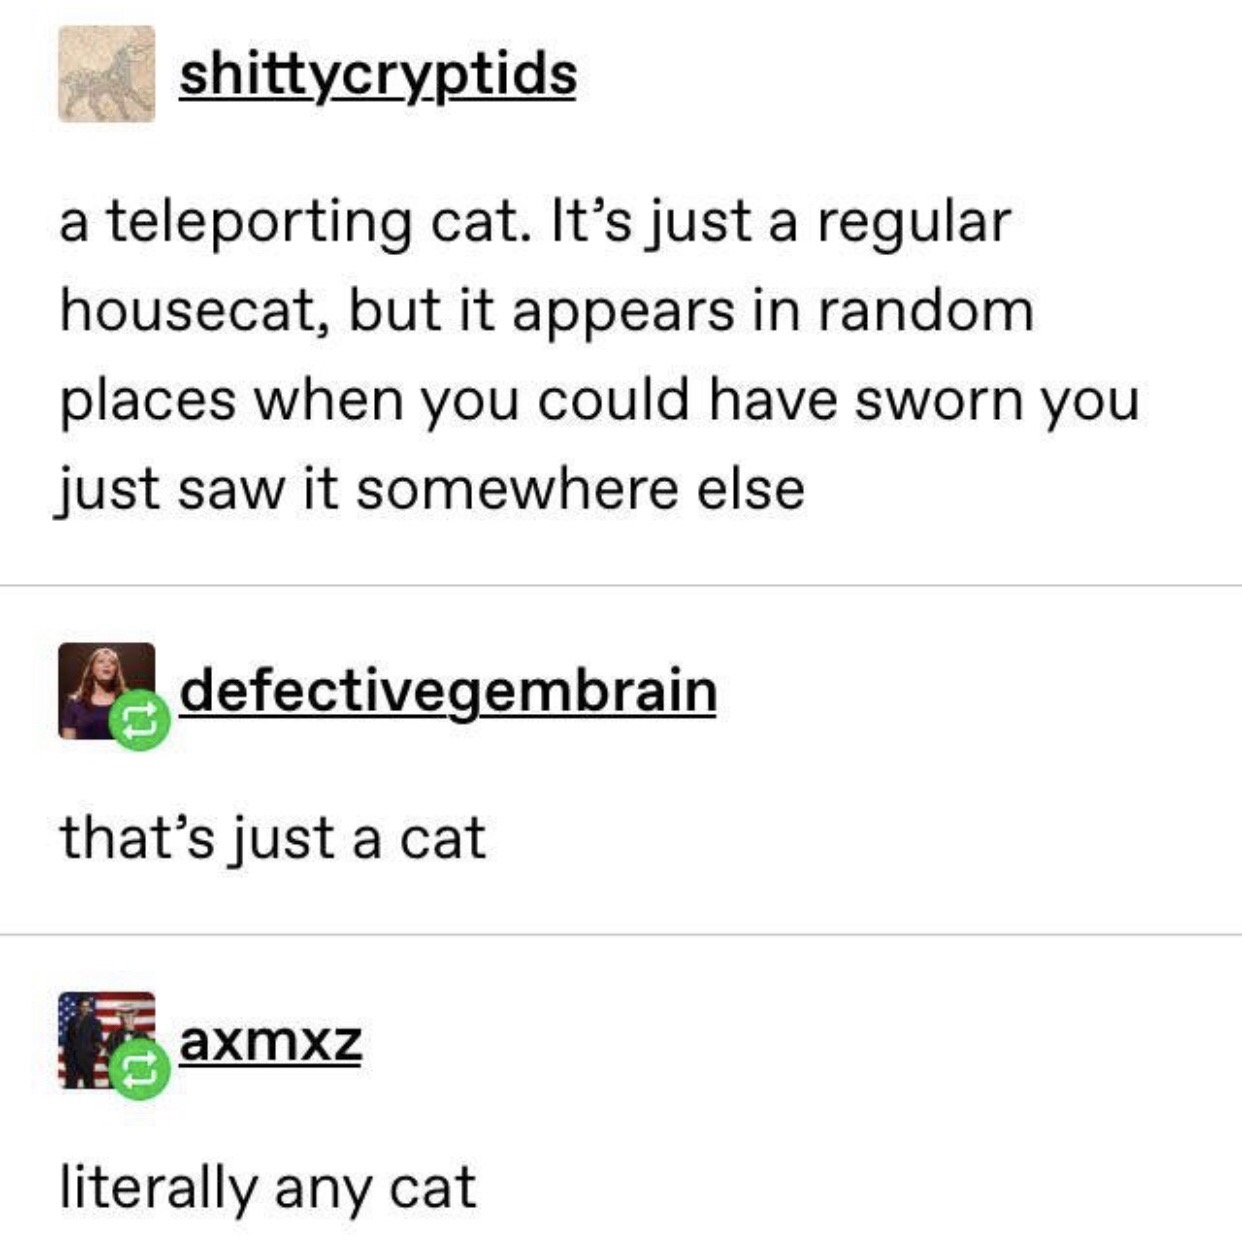 document - shittycryptids a teleporting cat. It's just a regular housecat, but it appears in random places when you could have sworn you just saw it somewhere else defectivegembrain that's just a cat axmxz literally any cat